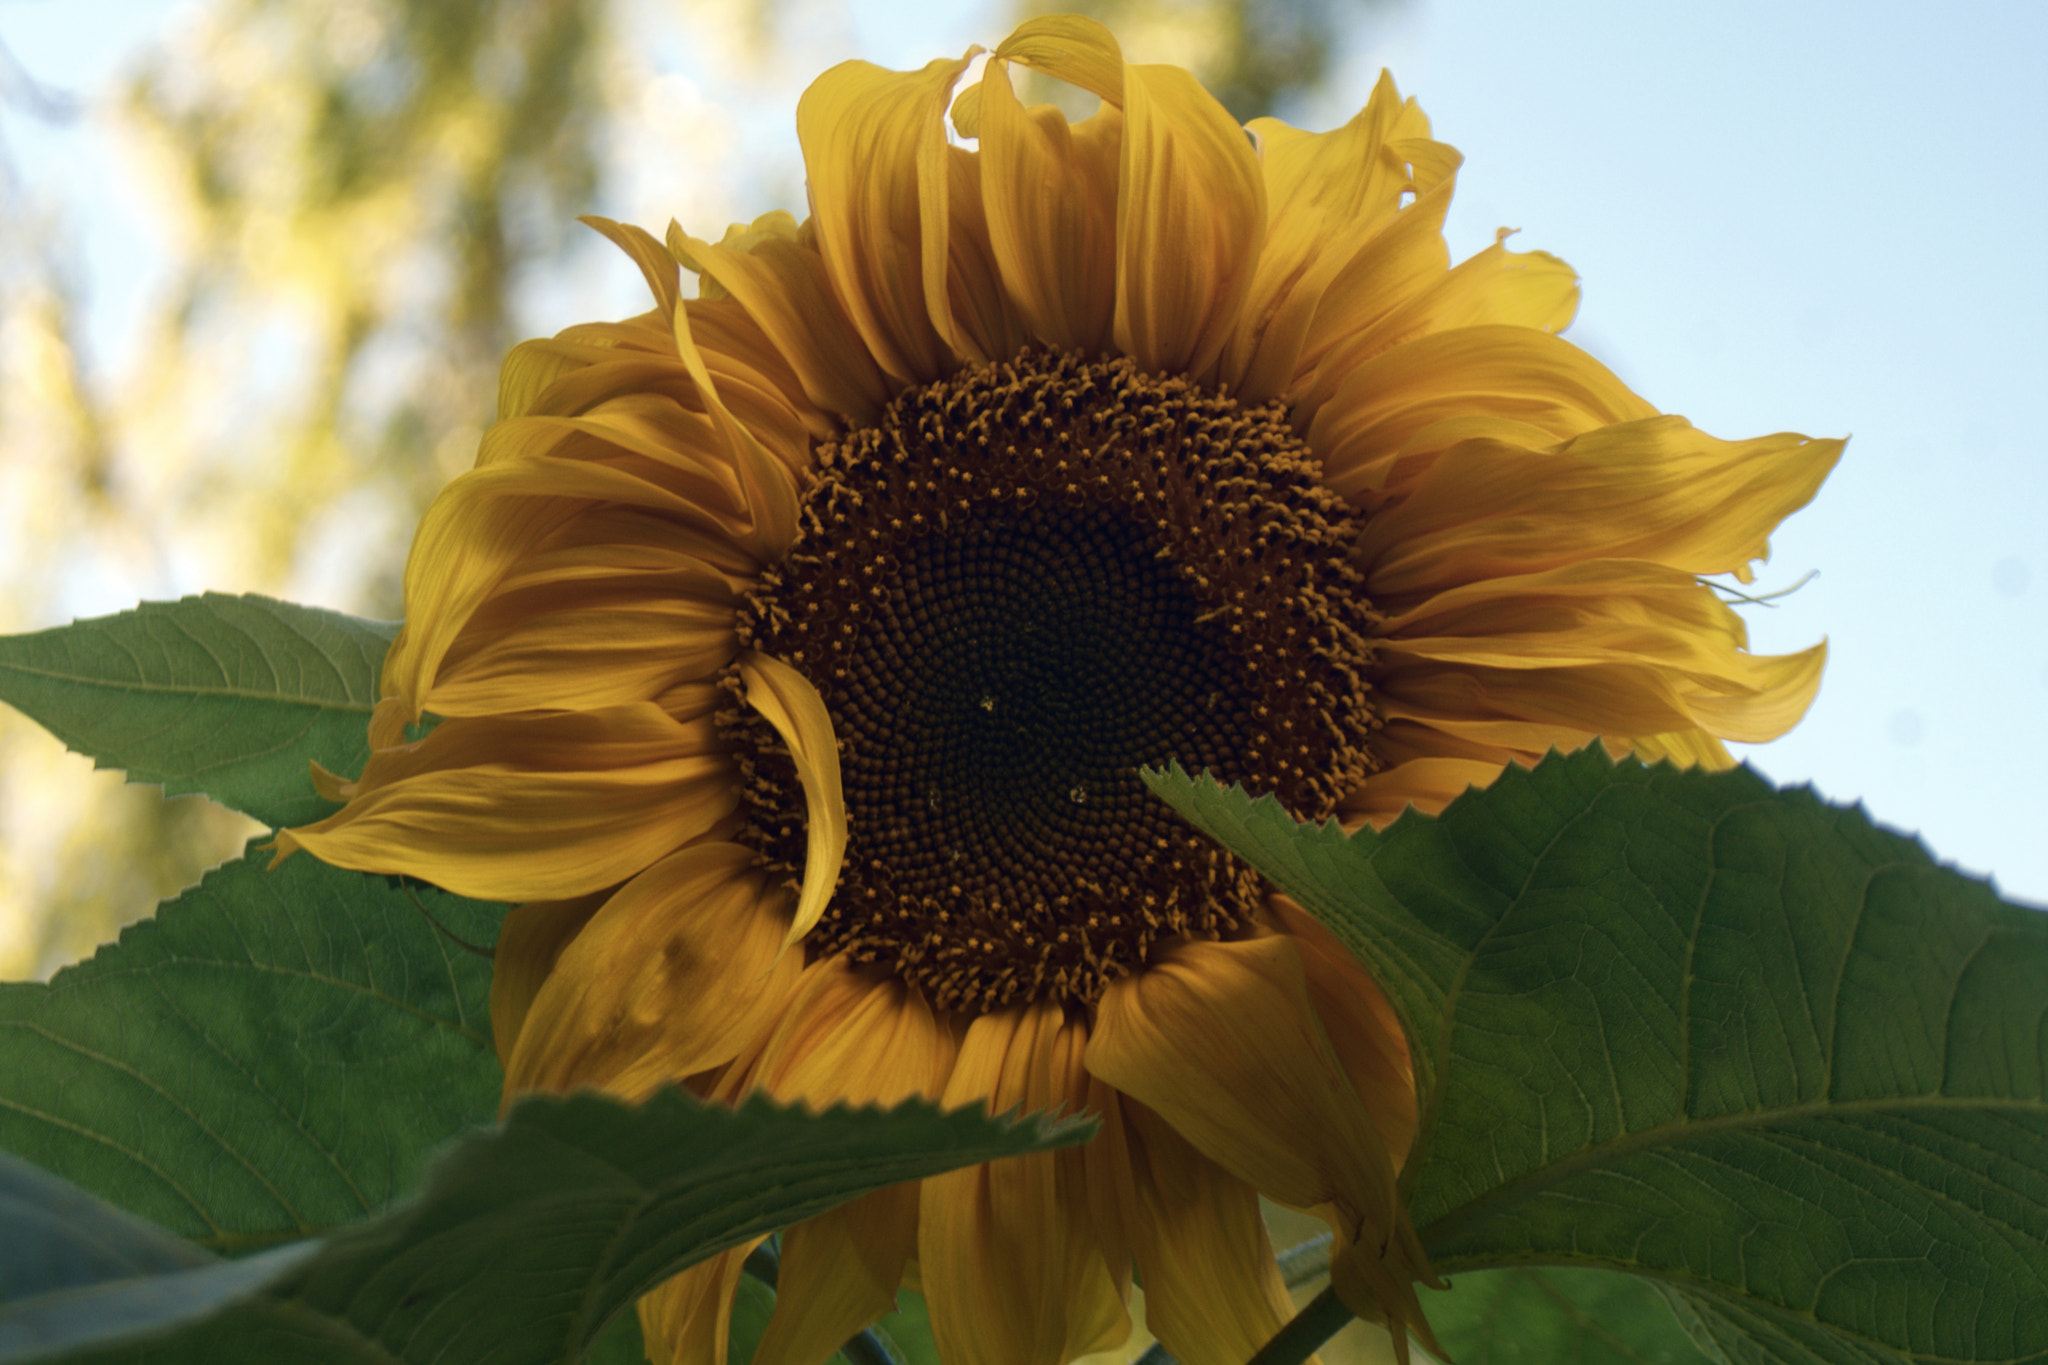 Sony SLT-A77 + Tokina 80-400mm F4.5-5.6 AT-X AF II 840 sample photo. Sunflowers are beautiful photography